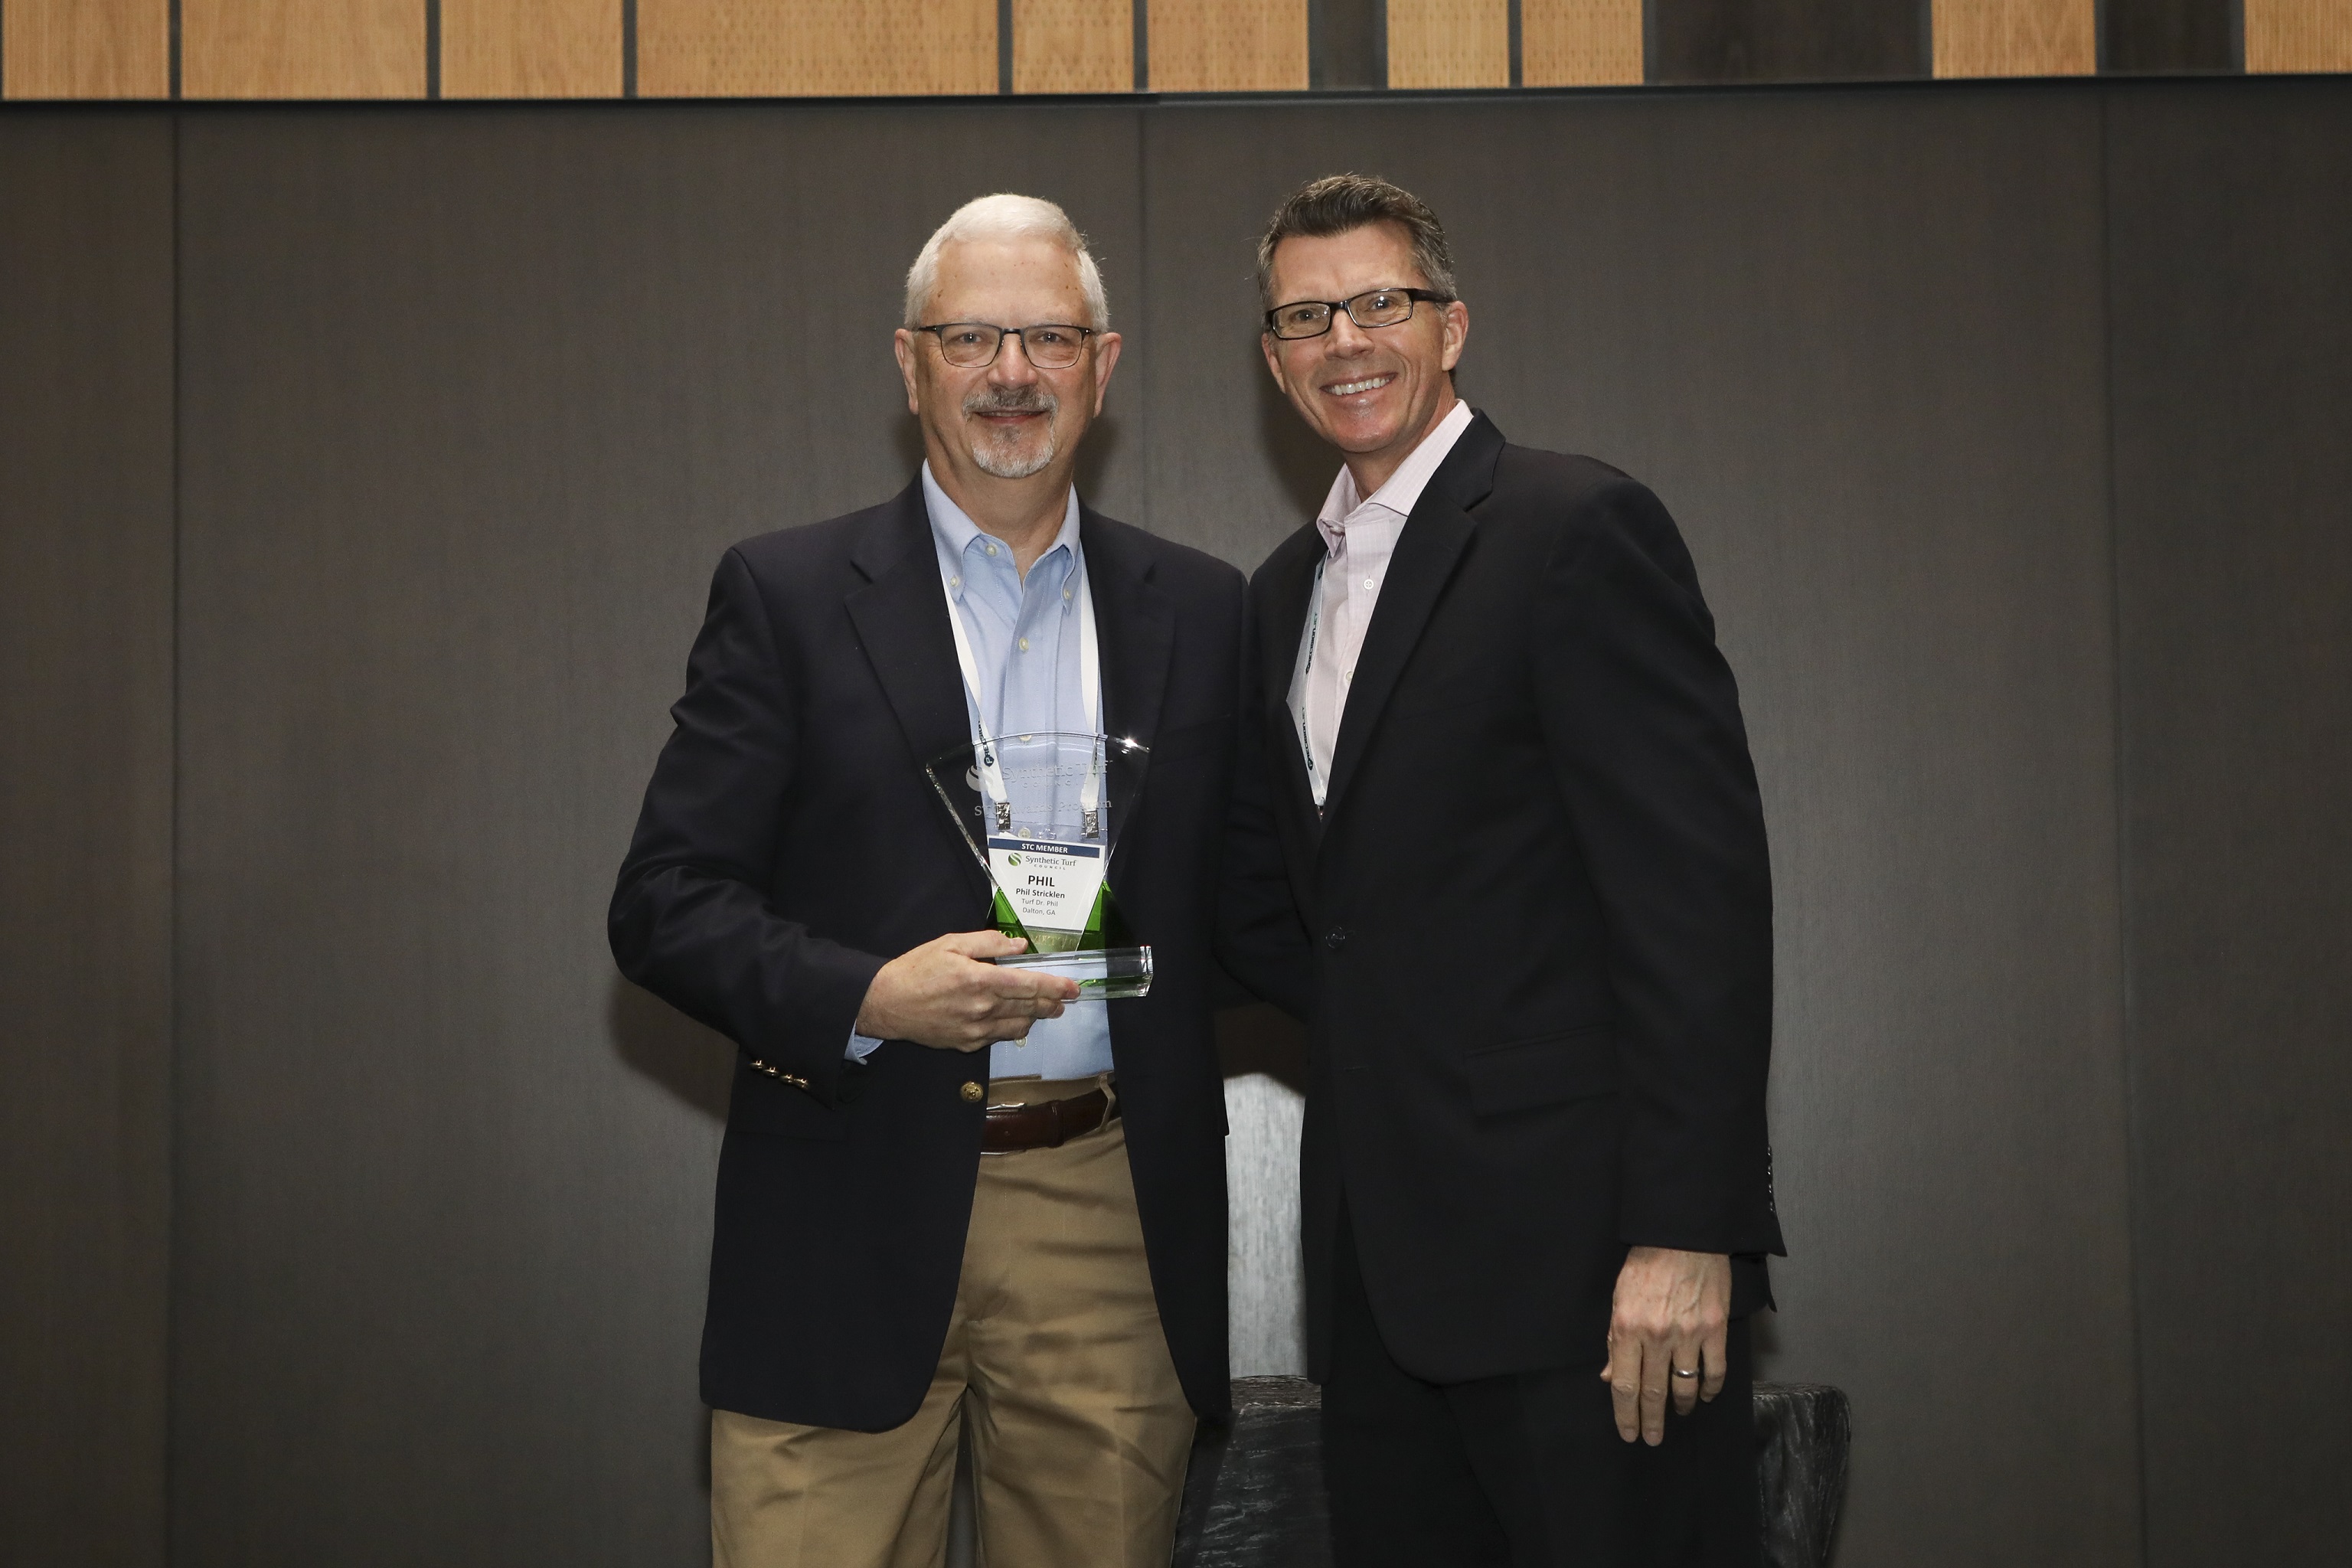 Kevin Barker, Chairman of the STC Board of Directors, presents the 2019 STC Lifetime Achievement Award to Dr Phil Stricklen, of TurdDrPhil.com